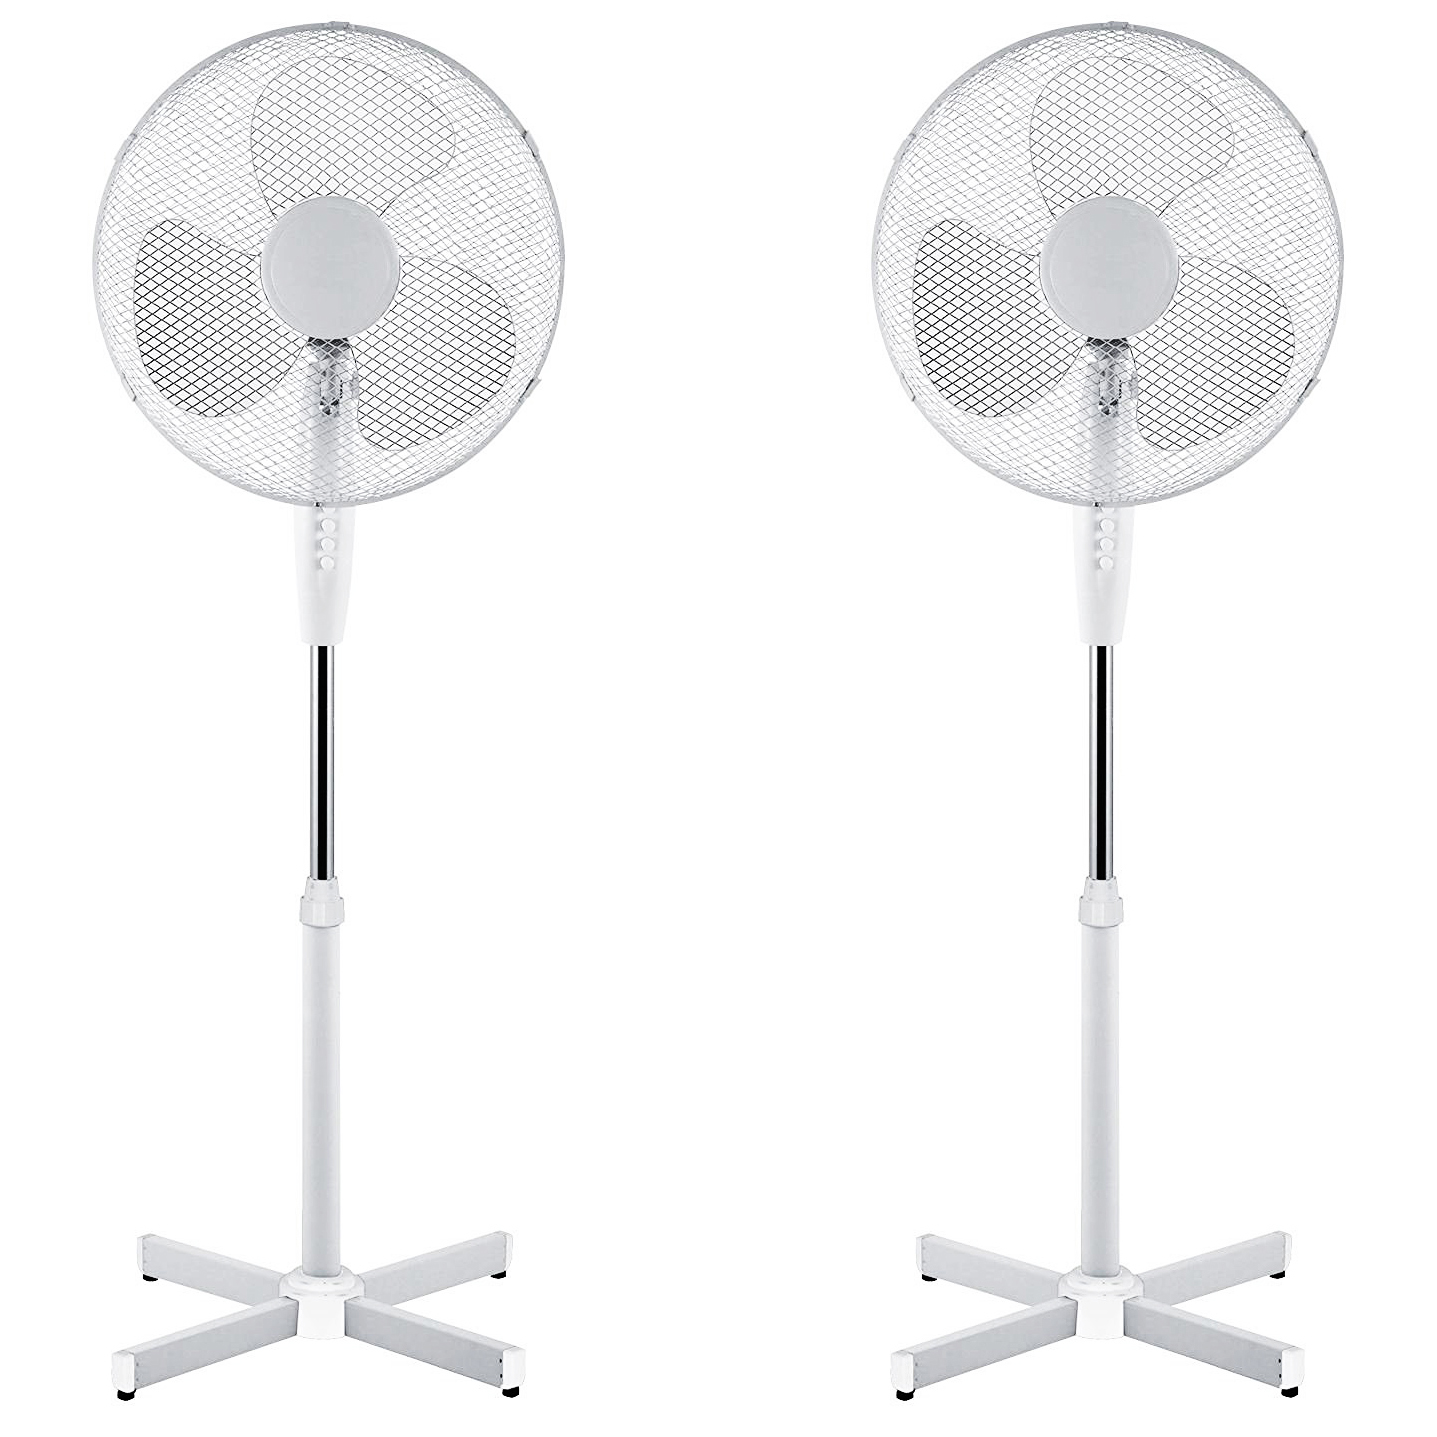 2 x 16 Electrical Oscillating Electric Fans - Click Image to Close